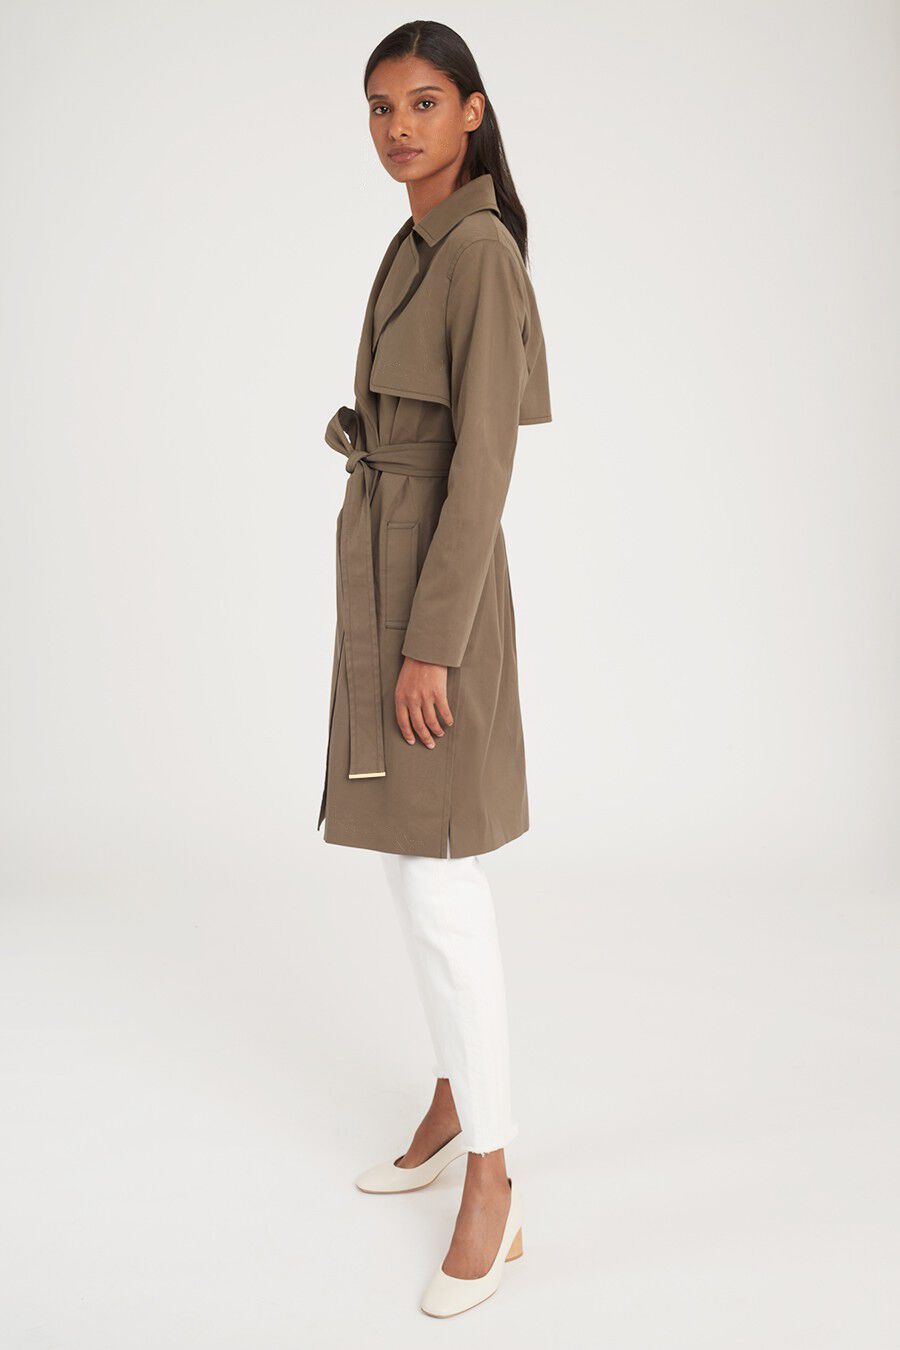 Woman standing side profile in a trench coat and pants.